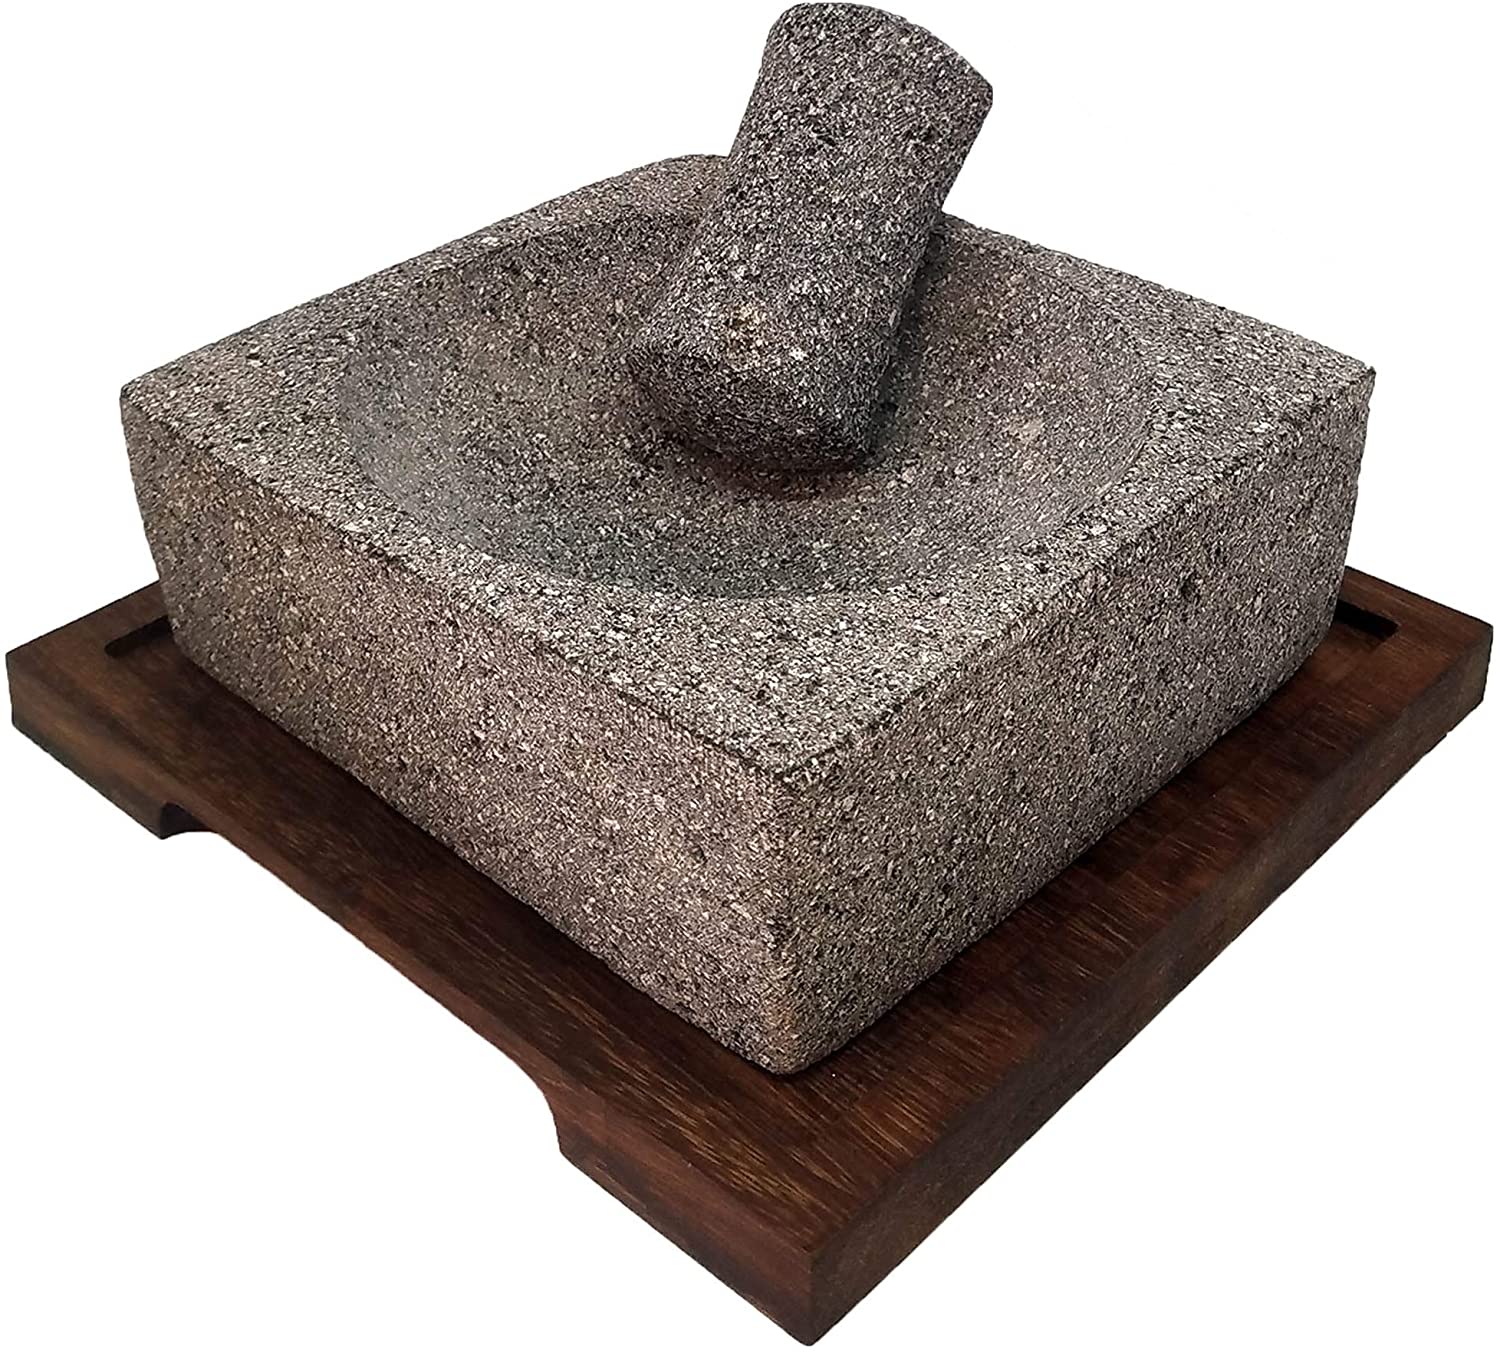  / 8'' Square Mortar and Pestle Set with Parota Wood Serving Board